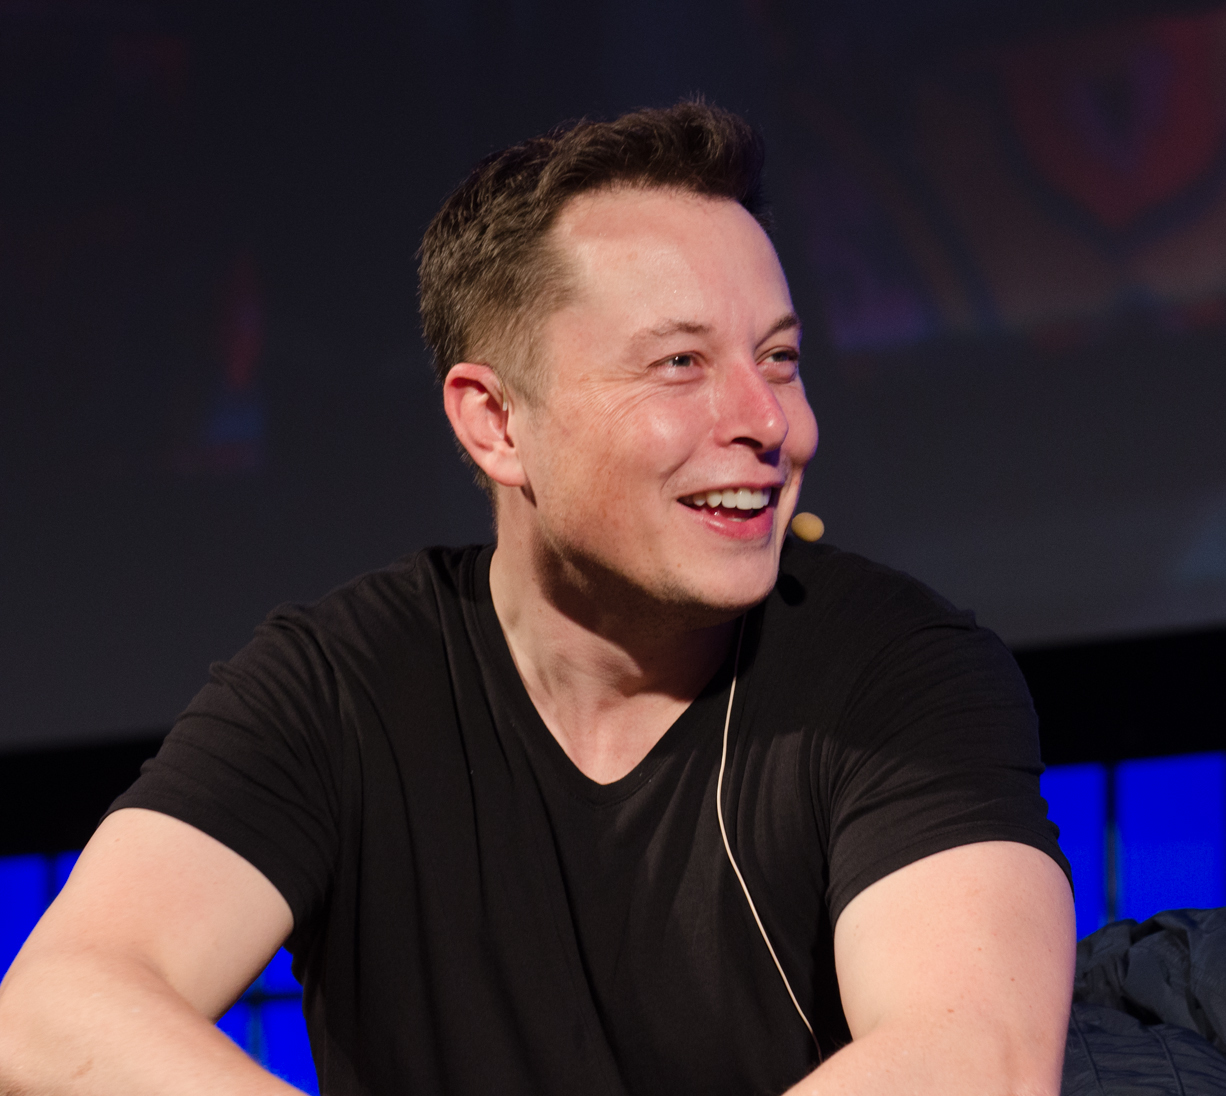 A Tesla Will Drive Itself Across the USA By 2018 According to Elon Musk